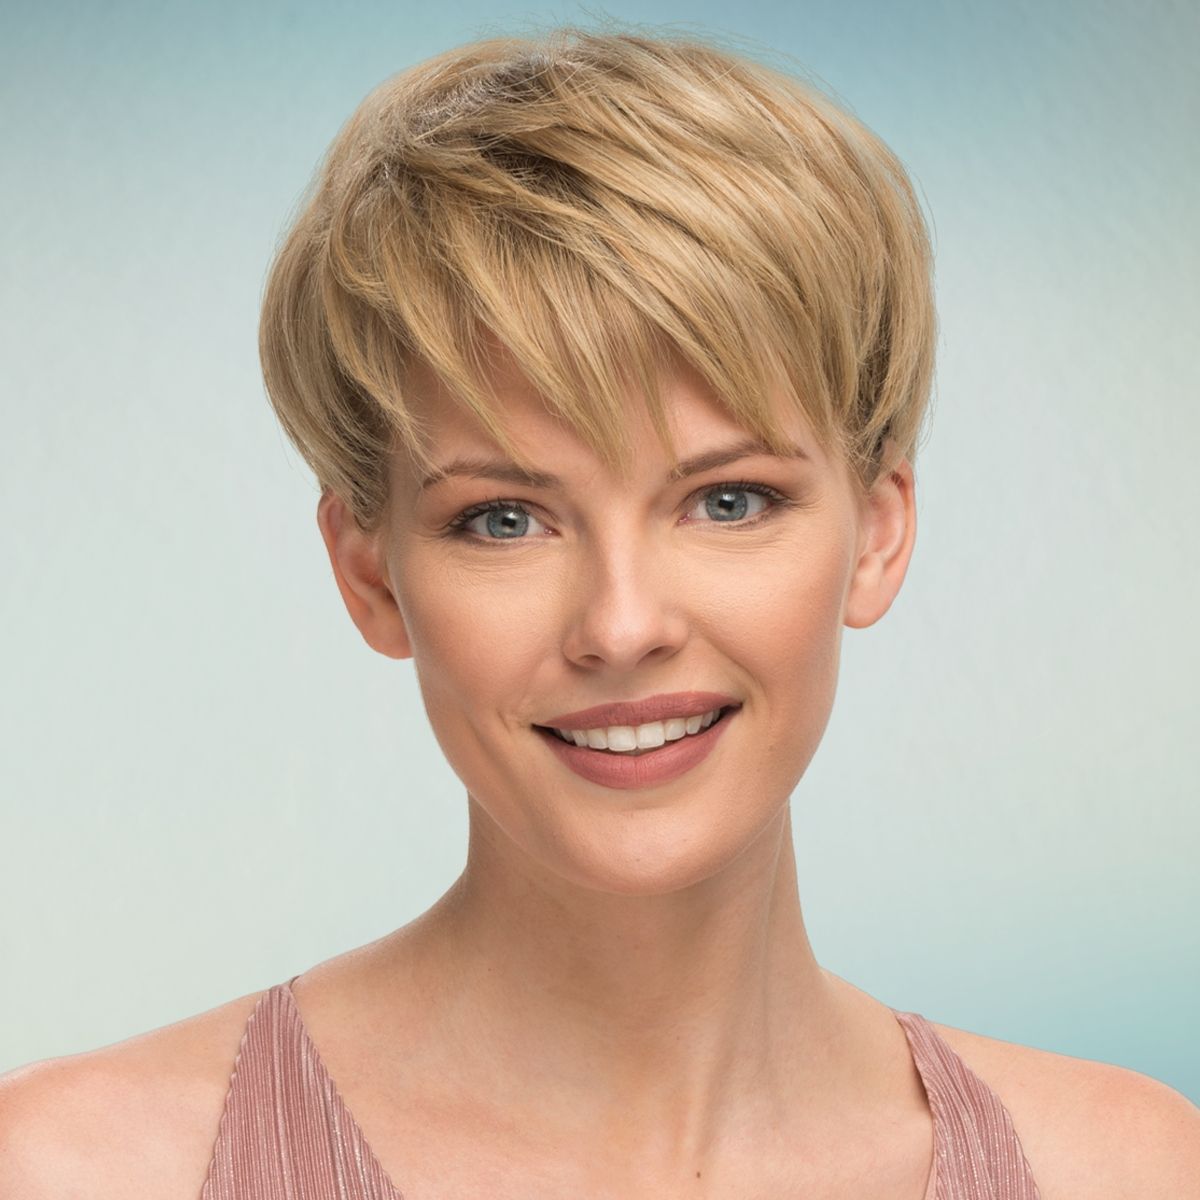 The Classic Pixie Haircut Is A Contemporary Hairstyle That's Short Throughout Most Up To Date Classic Pixie Haircuts (Photo 12 of 15)